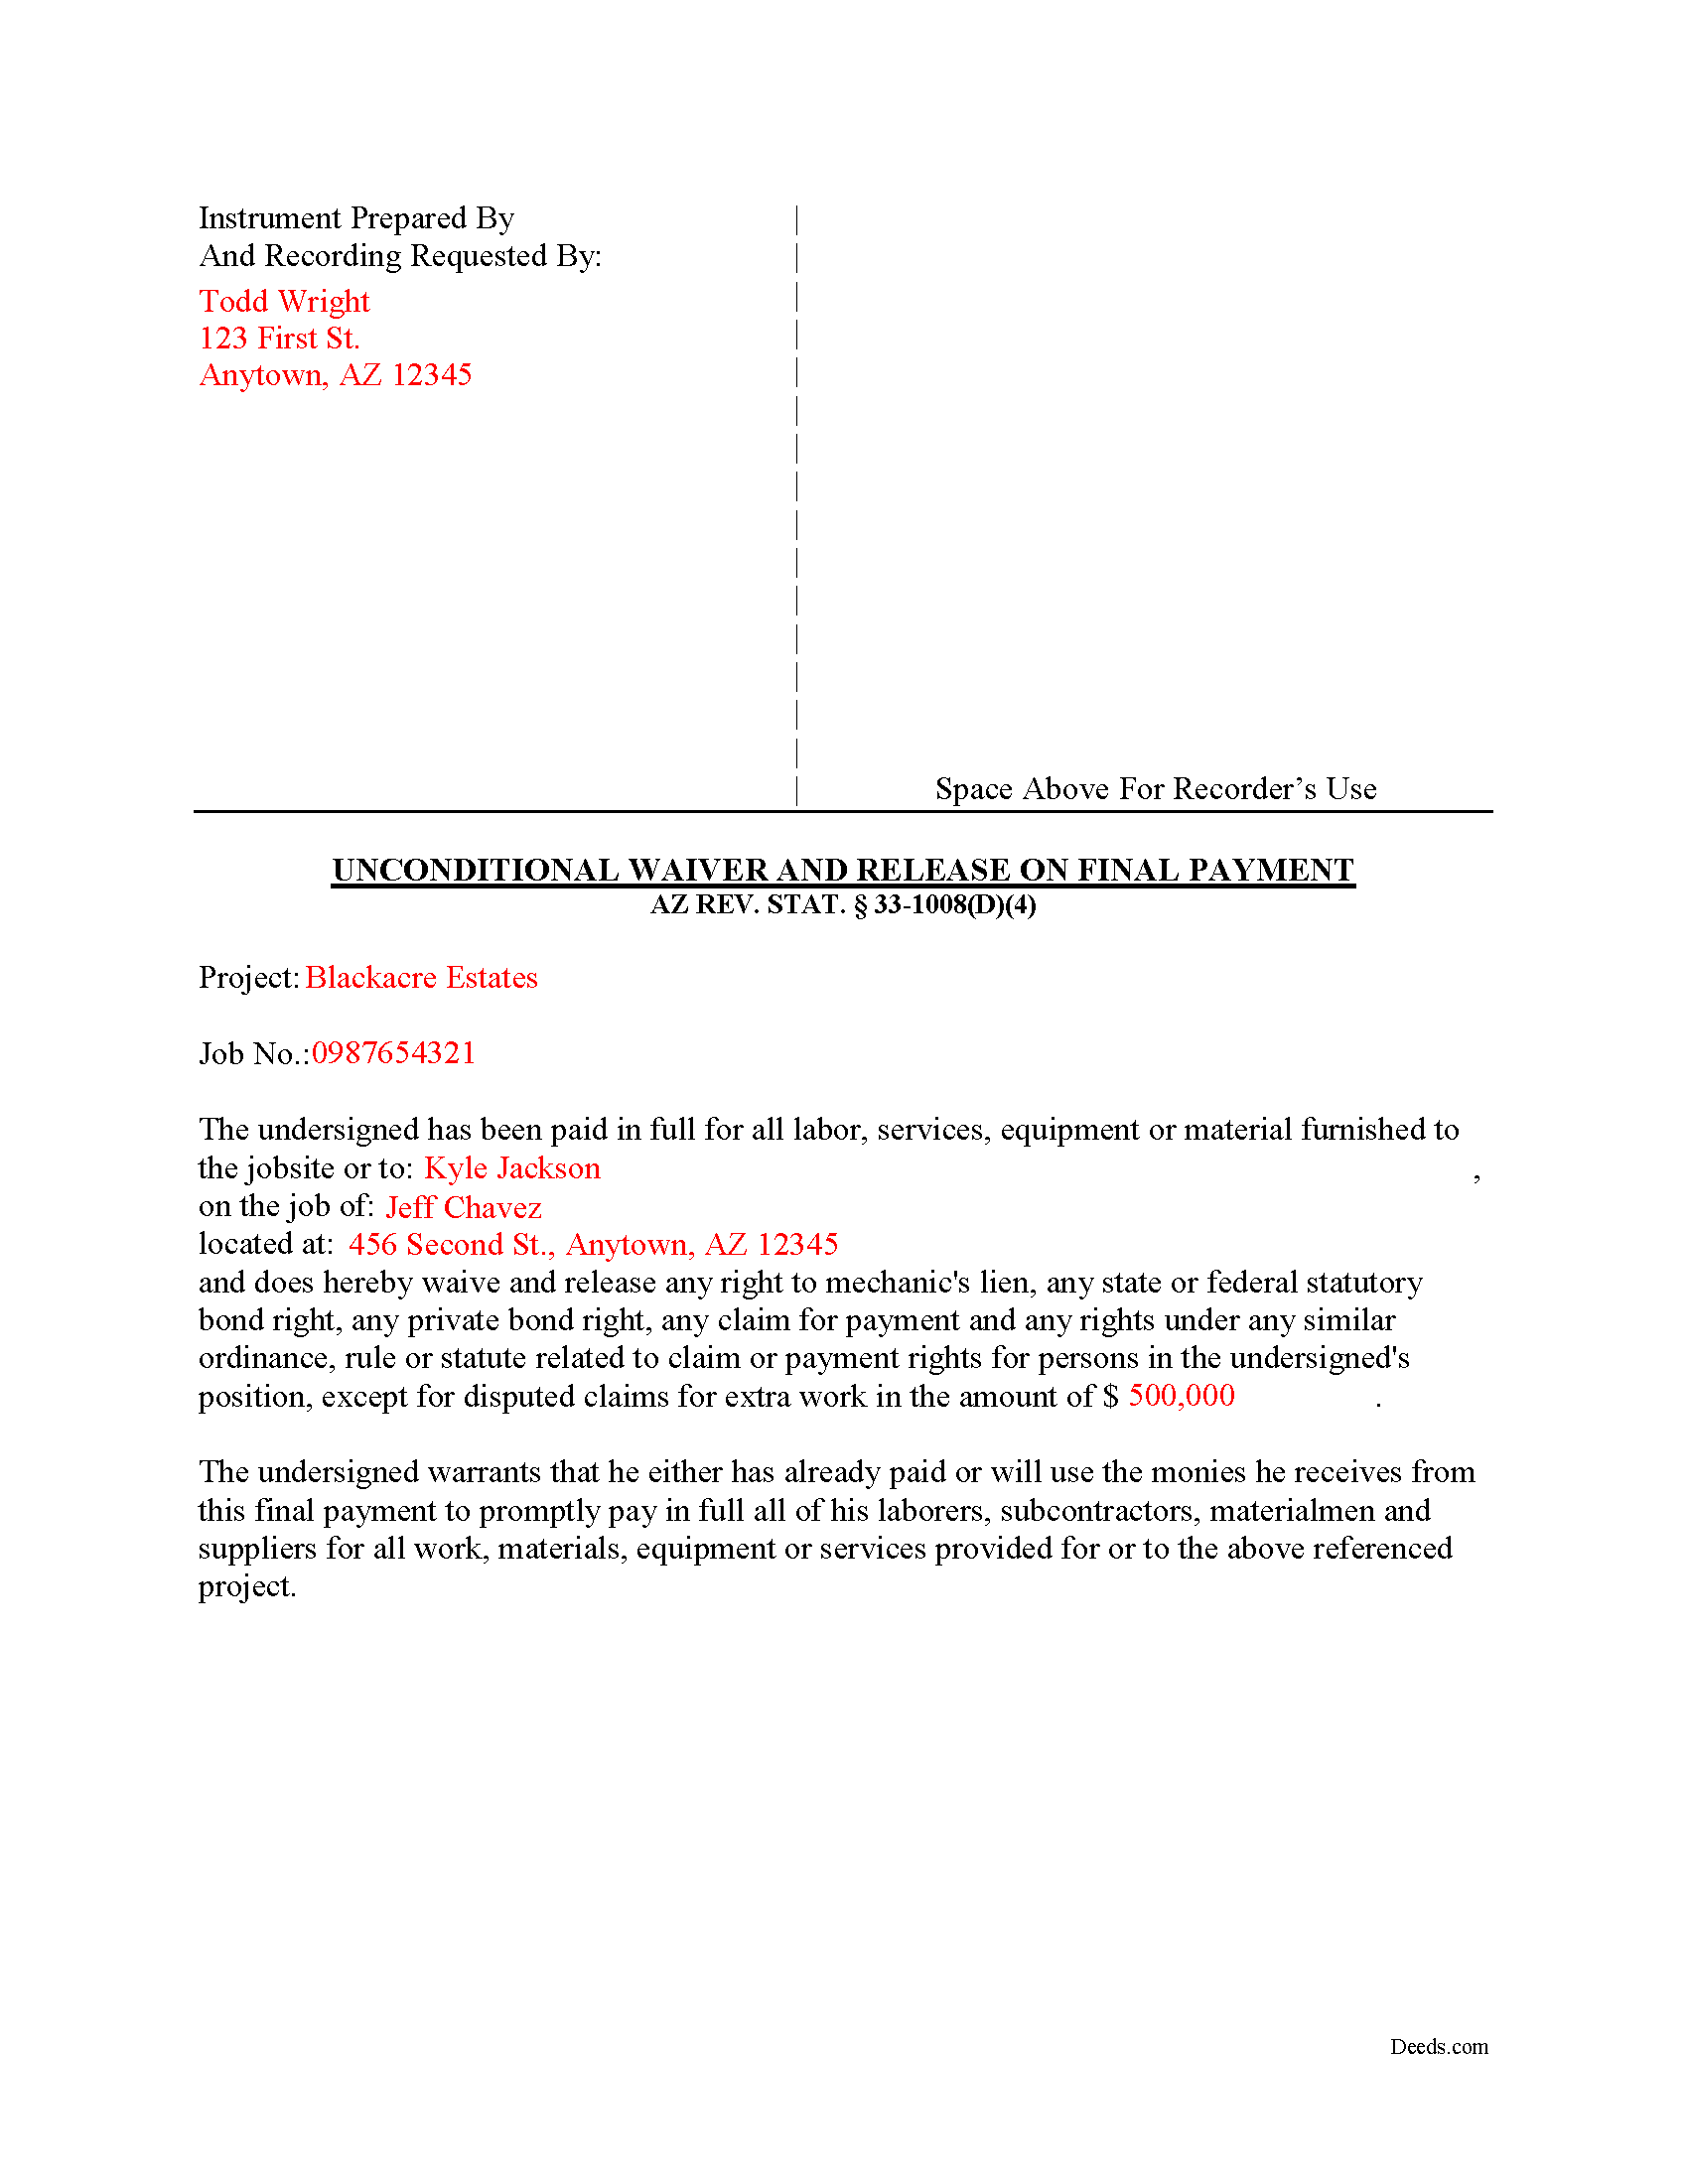 Completed Example of the Unconditional Waiver upon Final Payment Document